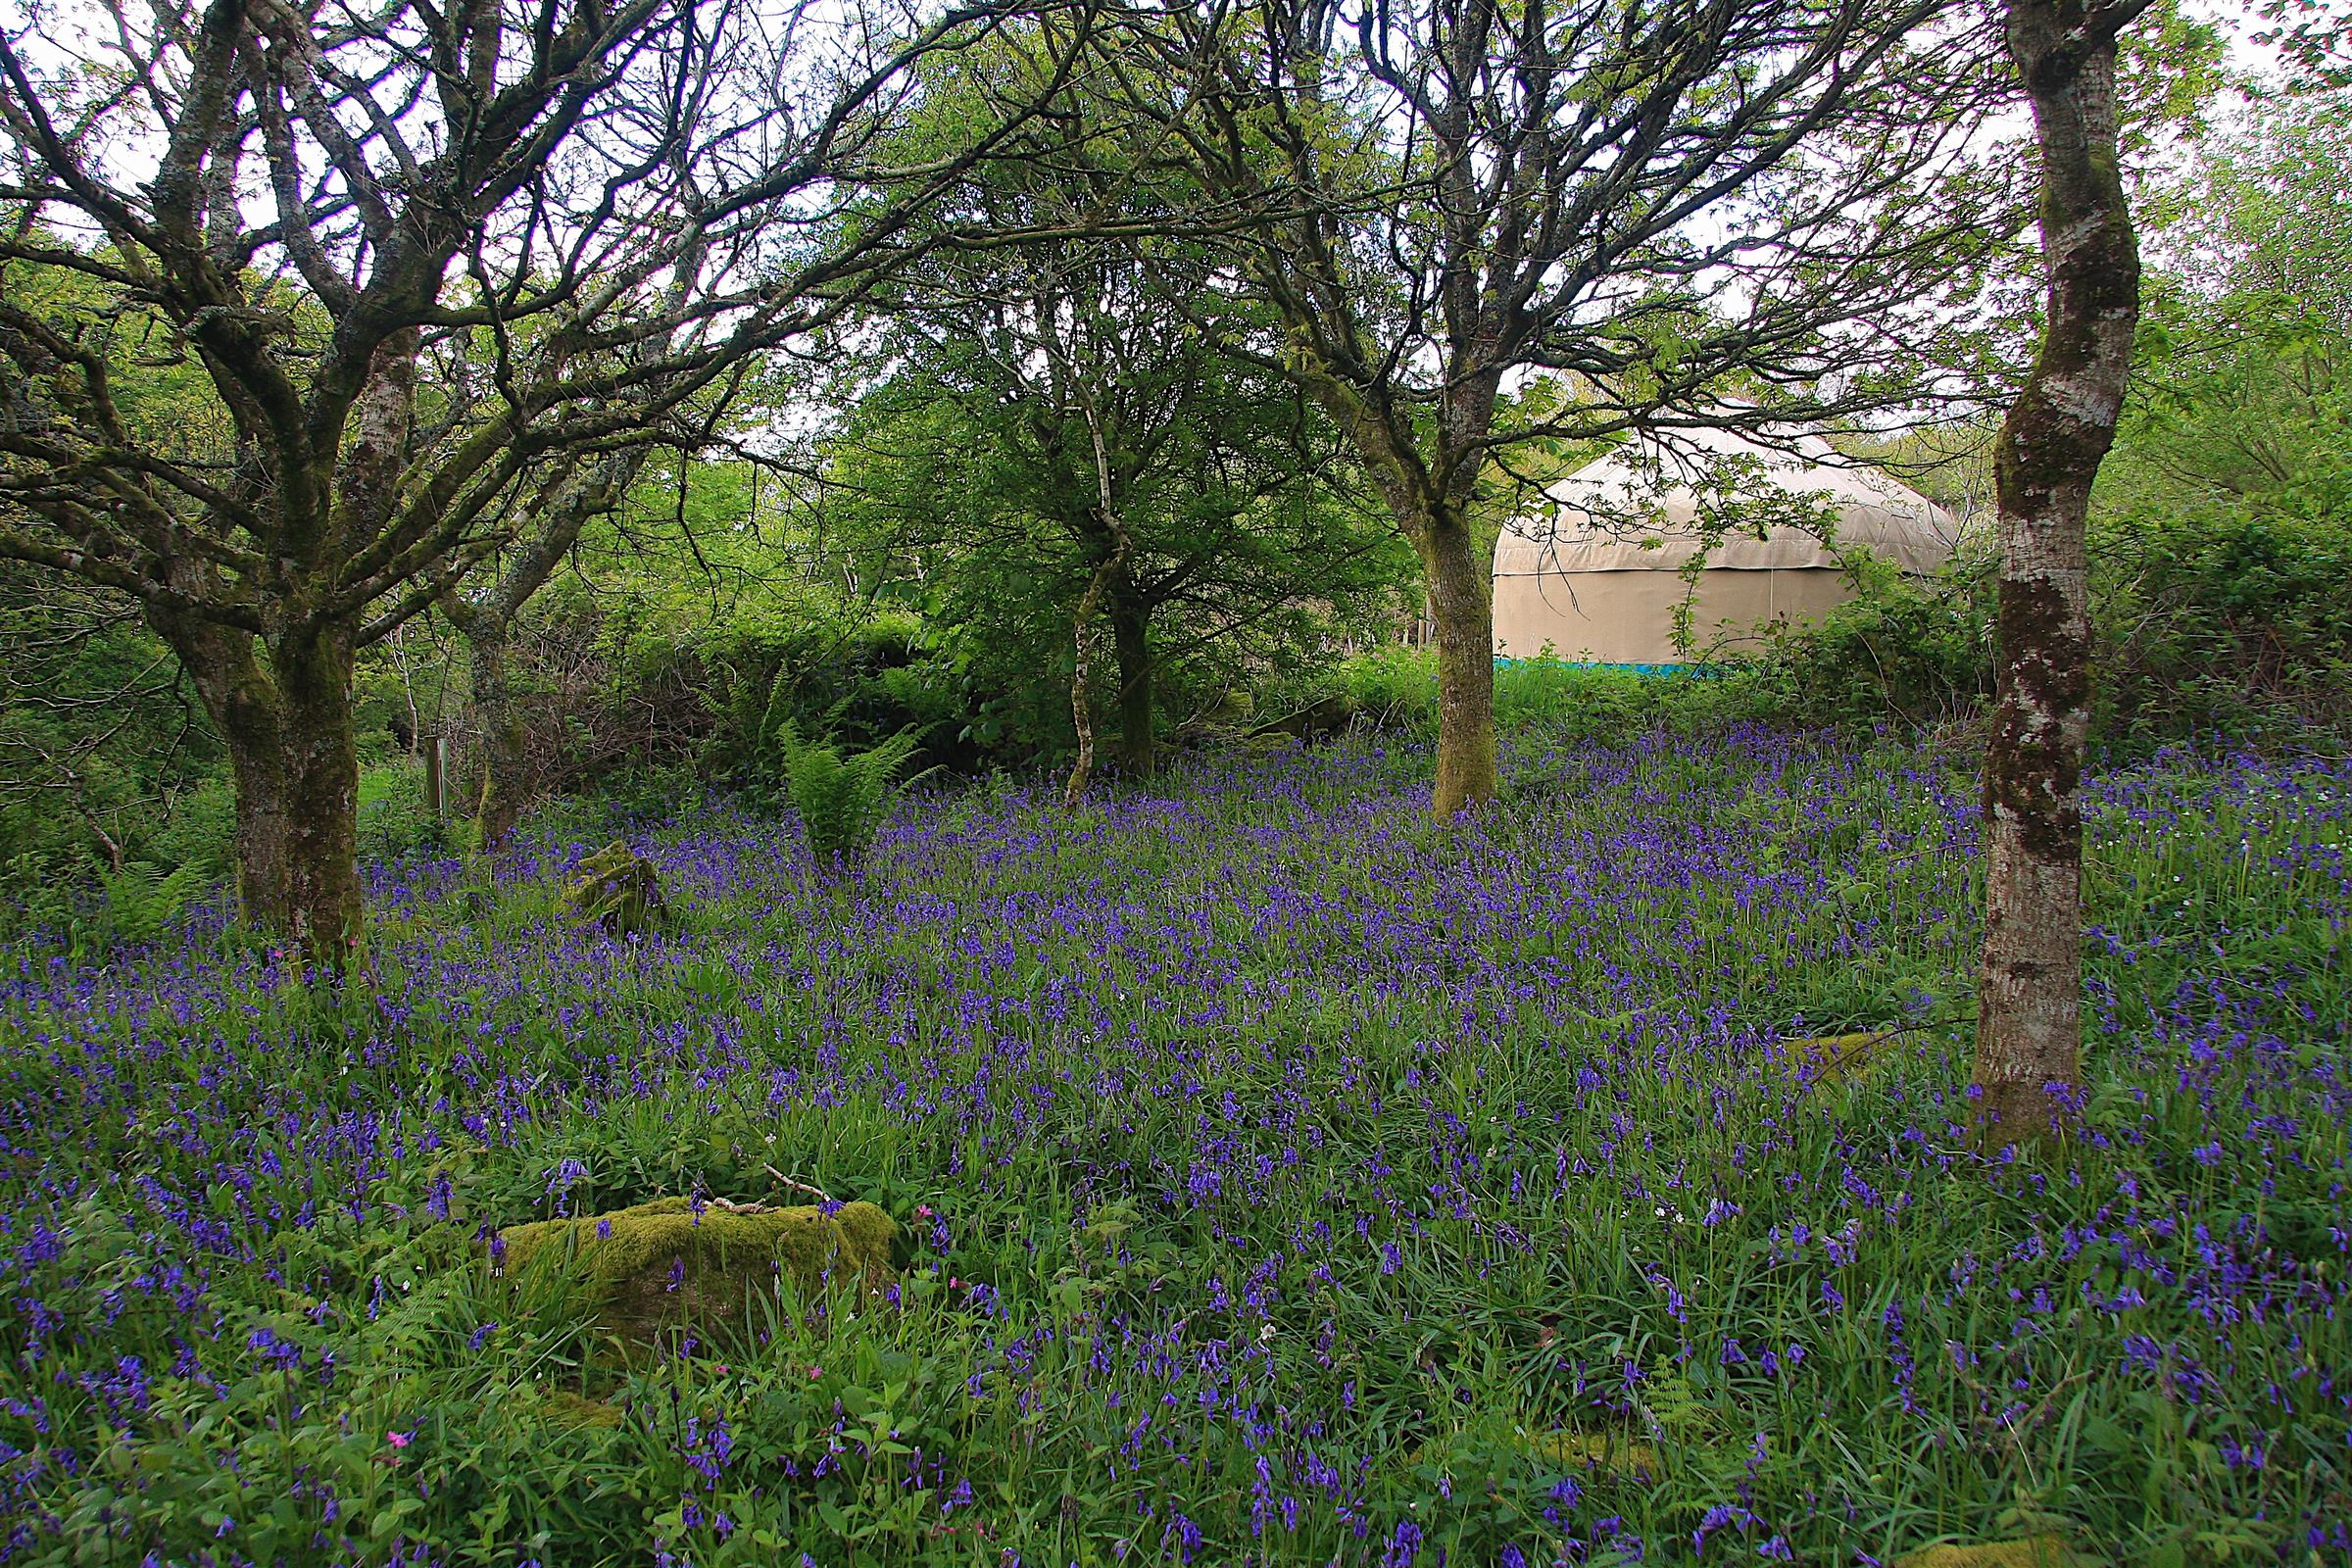 Bluebell wood and oak trees behind the yurt